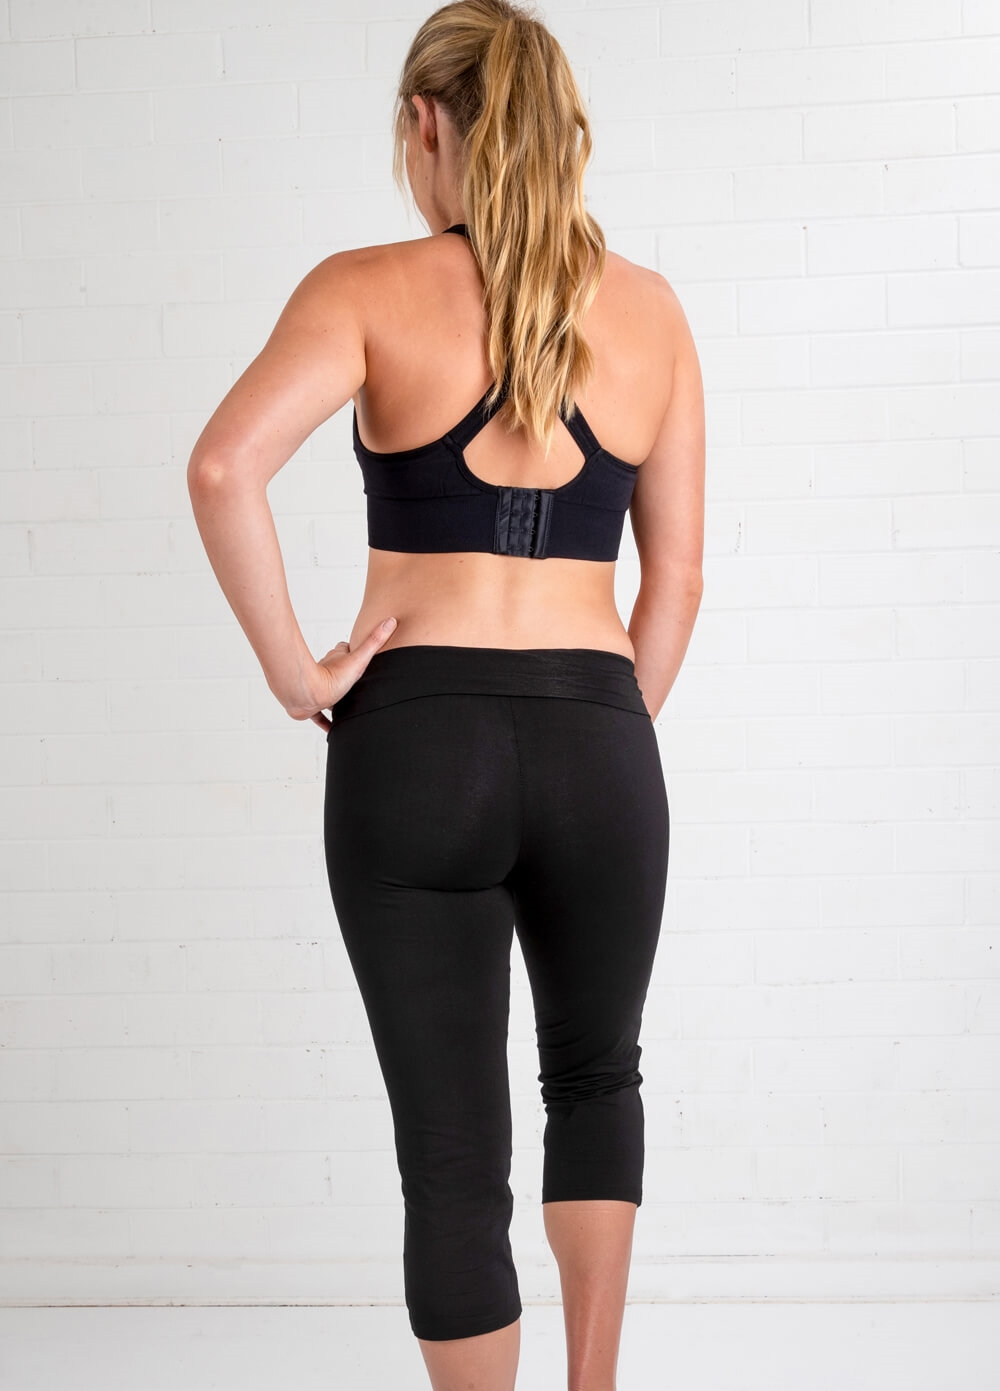 Trimester - Libertine Cropped Maternity Yoga Pants | Queen Bee